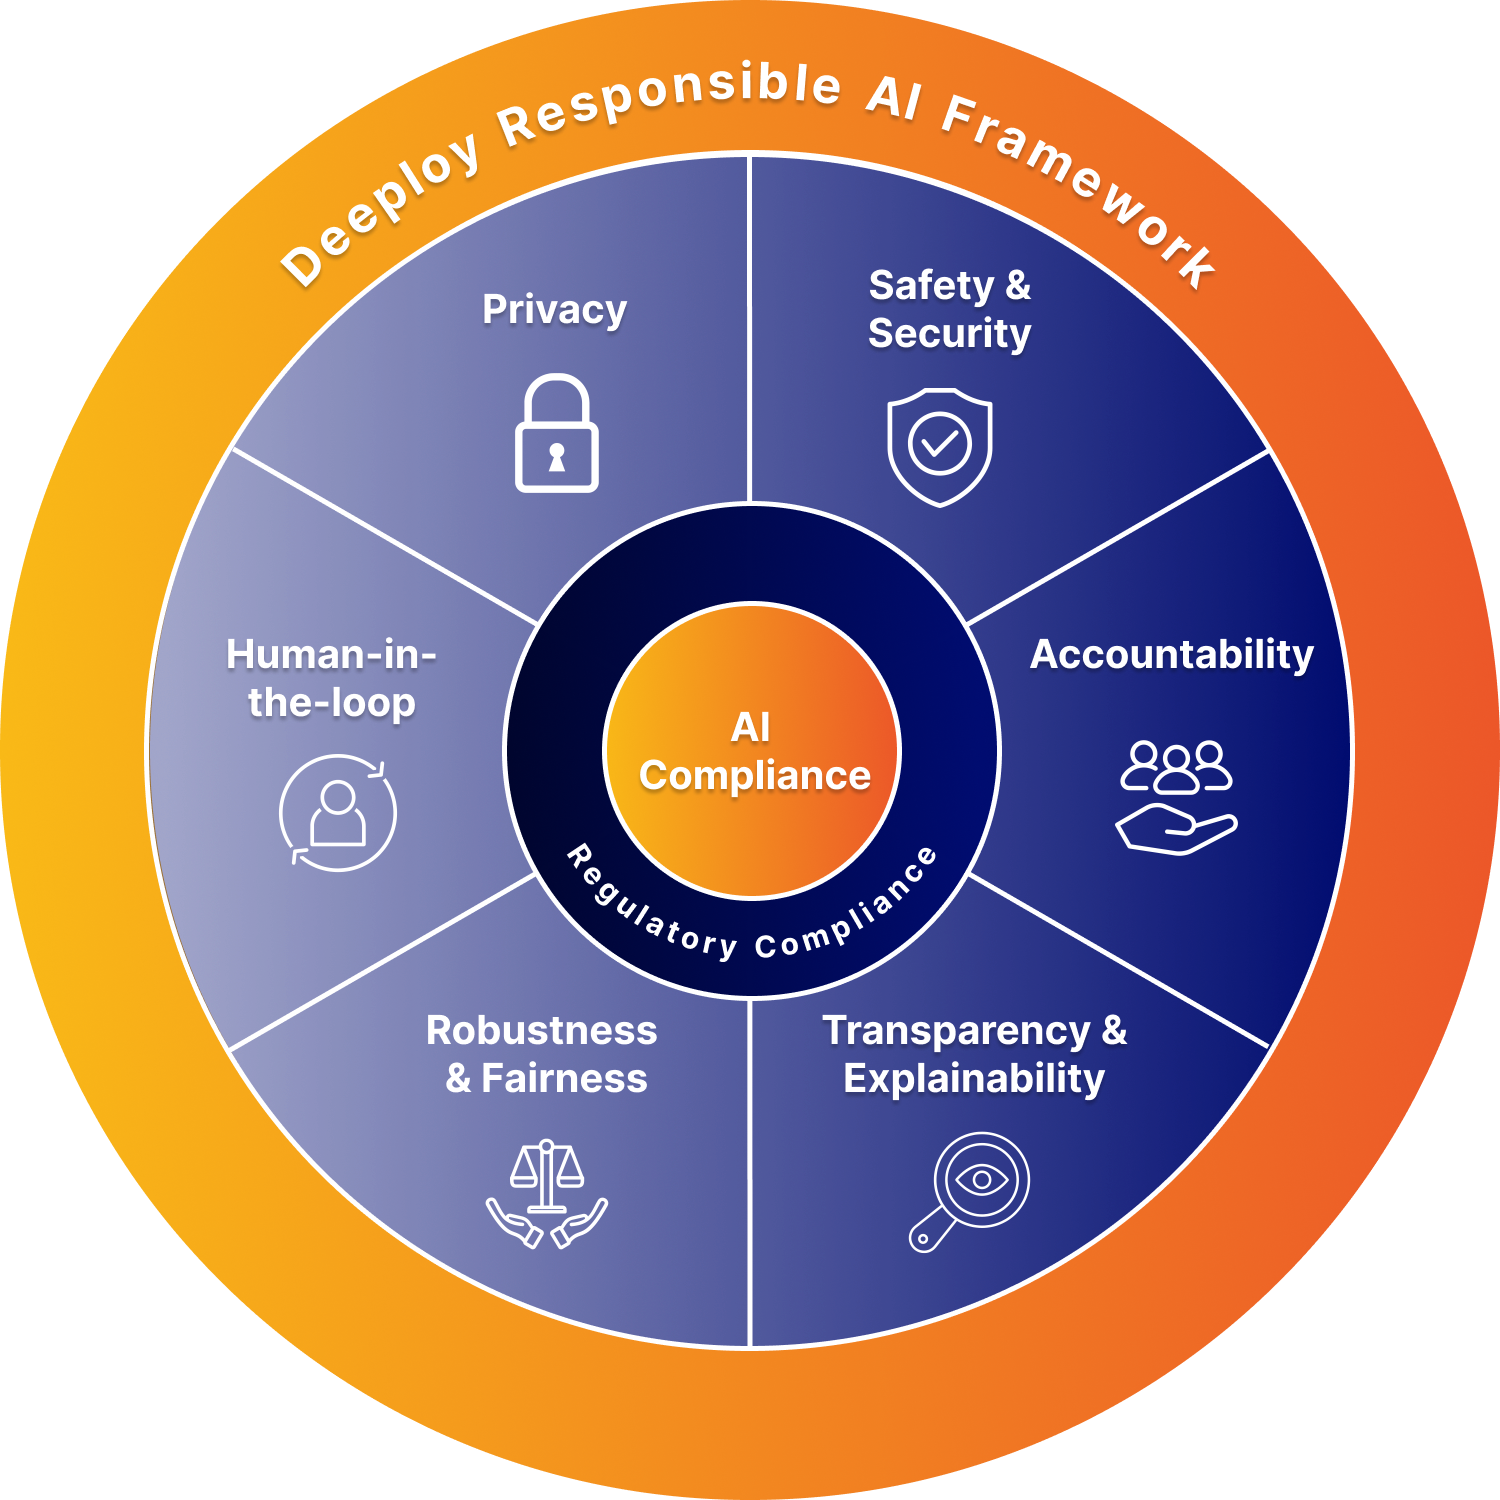 Image showing the responsible AI framework from Deeploy. At the center of the image is a circle labeled "AI Governance," surrounded by a larger circle representing regulatory compliance. The larger circle is divided into six pillars, including Privacy, Safety & Security, Accountability, Transparency & Explainability, Robustness & Fairness, and Human-in-the-loop. Each pillar is labeled and shown as a section of the circle around the regulatory compliance circle